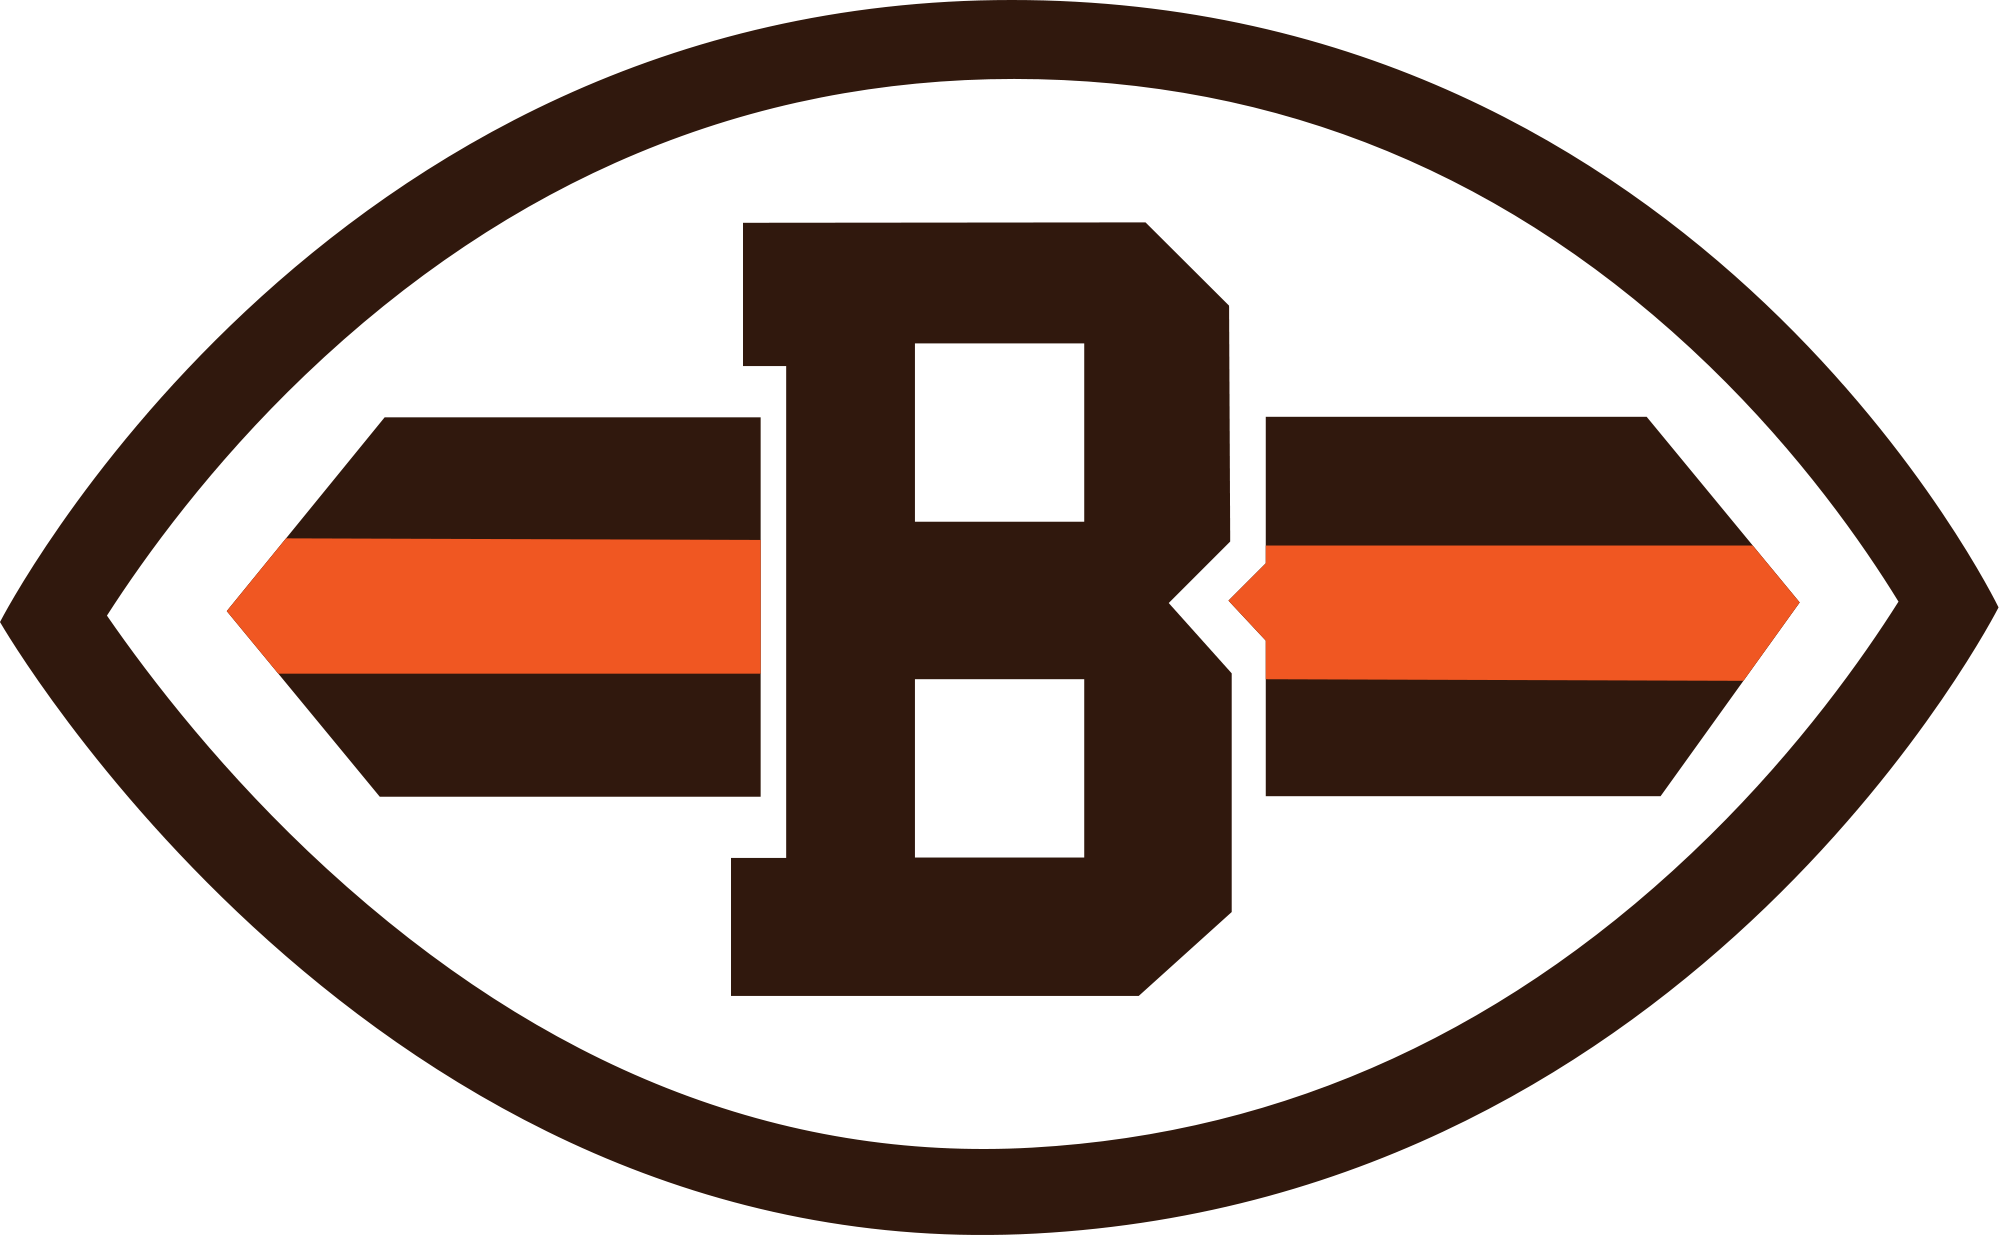 Cleveland Browns Logo - Cleveland Browns Logo transparent PNG - StickPNG